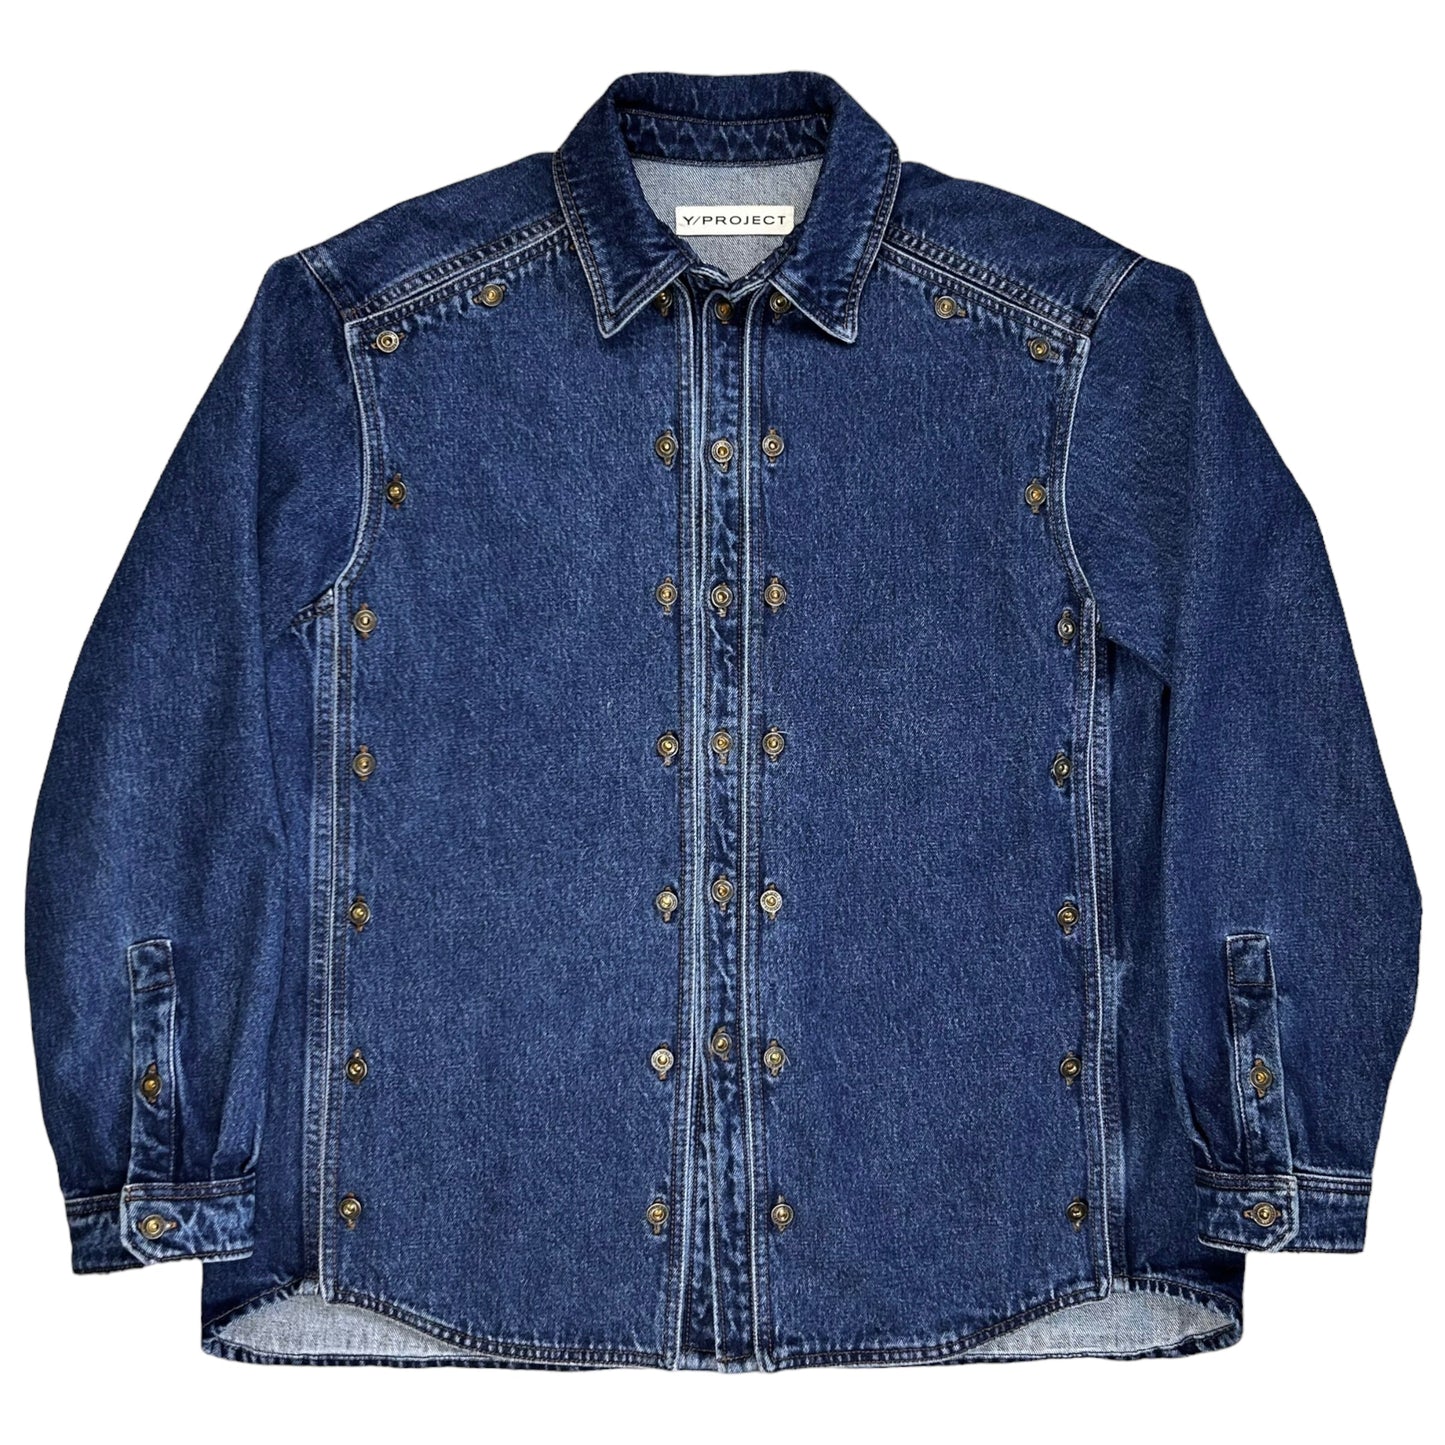 Y/Project Snap Panel Denim Shirt - AW22